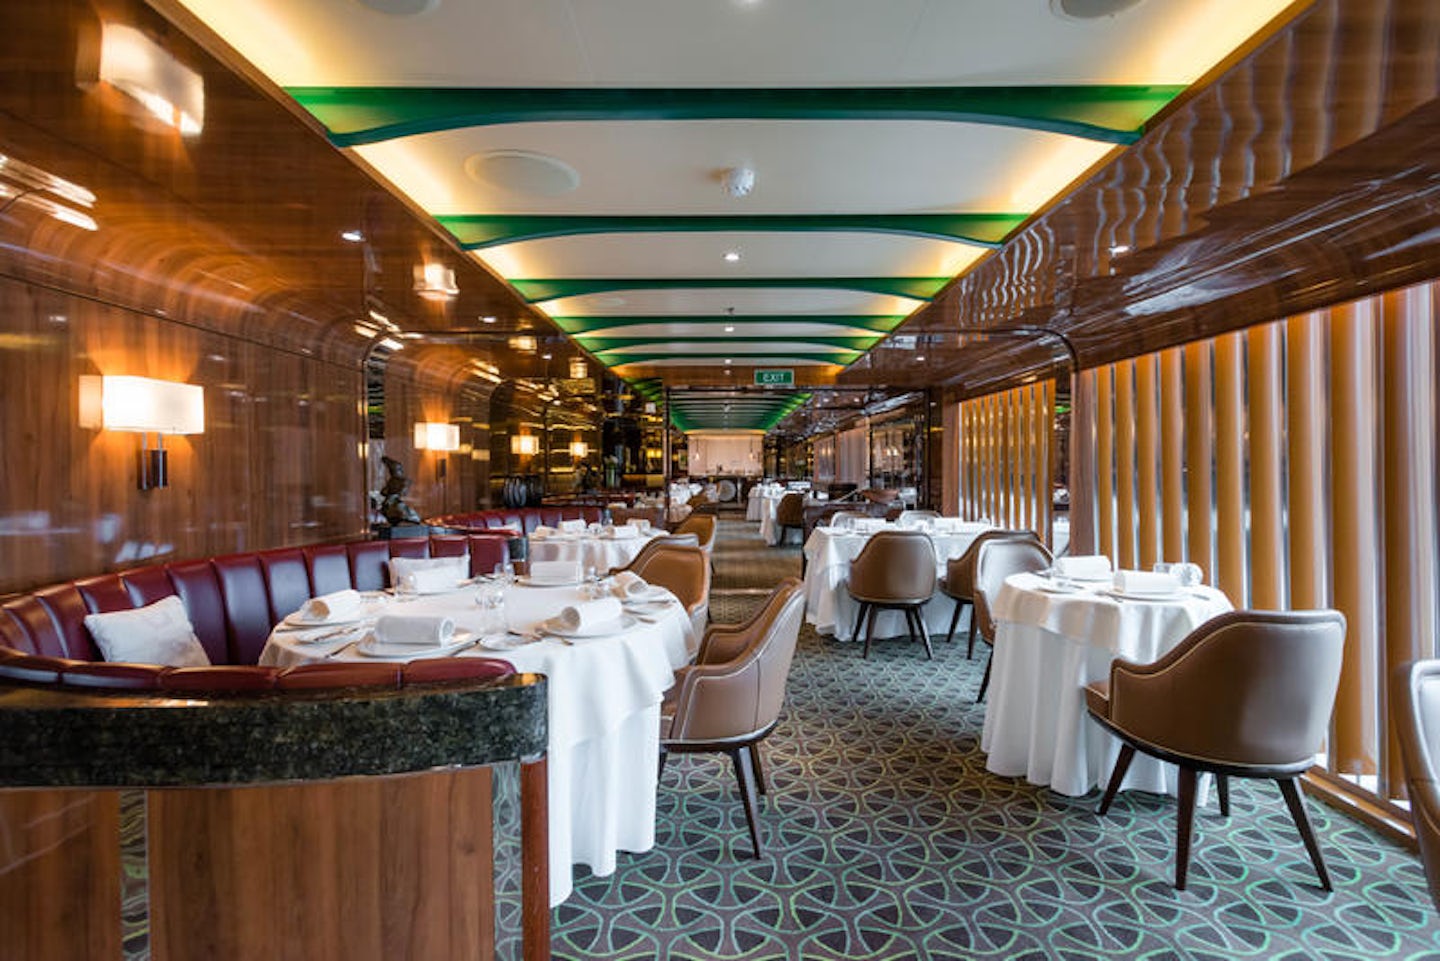 The Grill Restaurant on Seabourn Quest